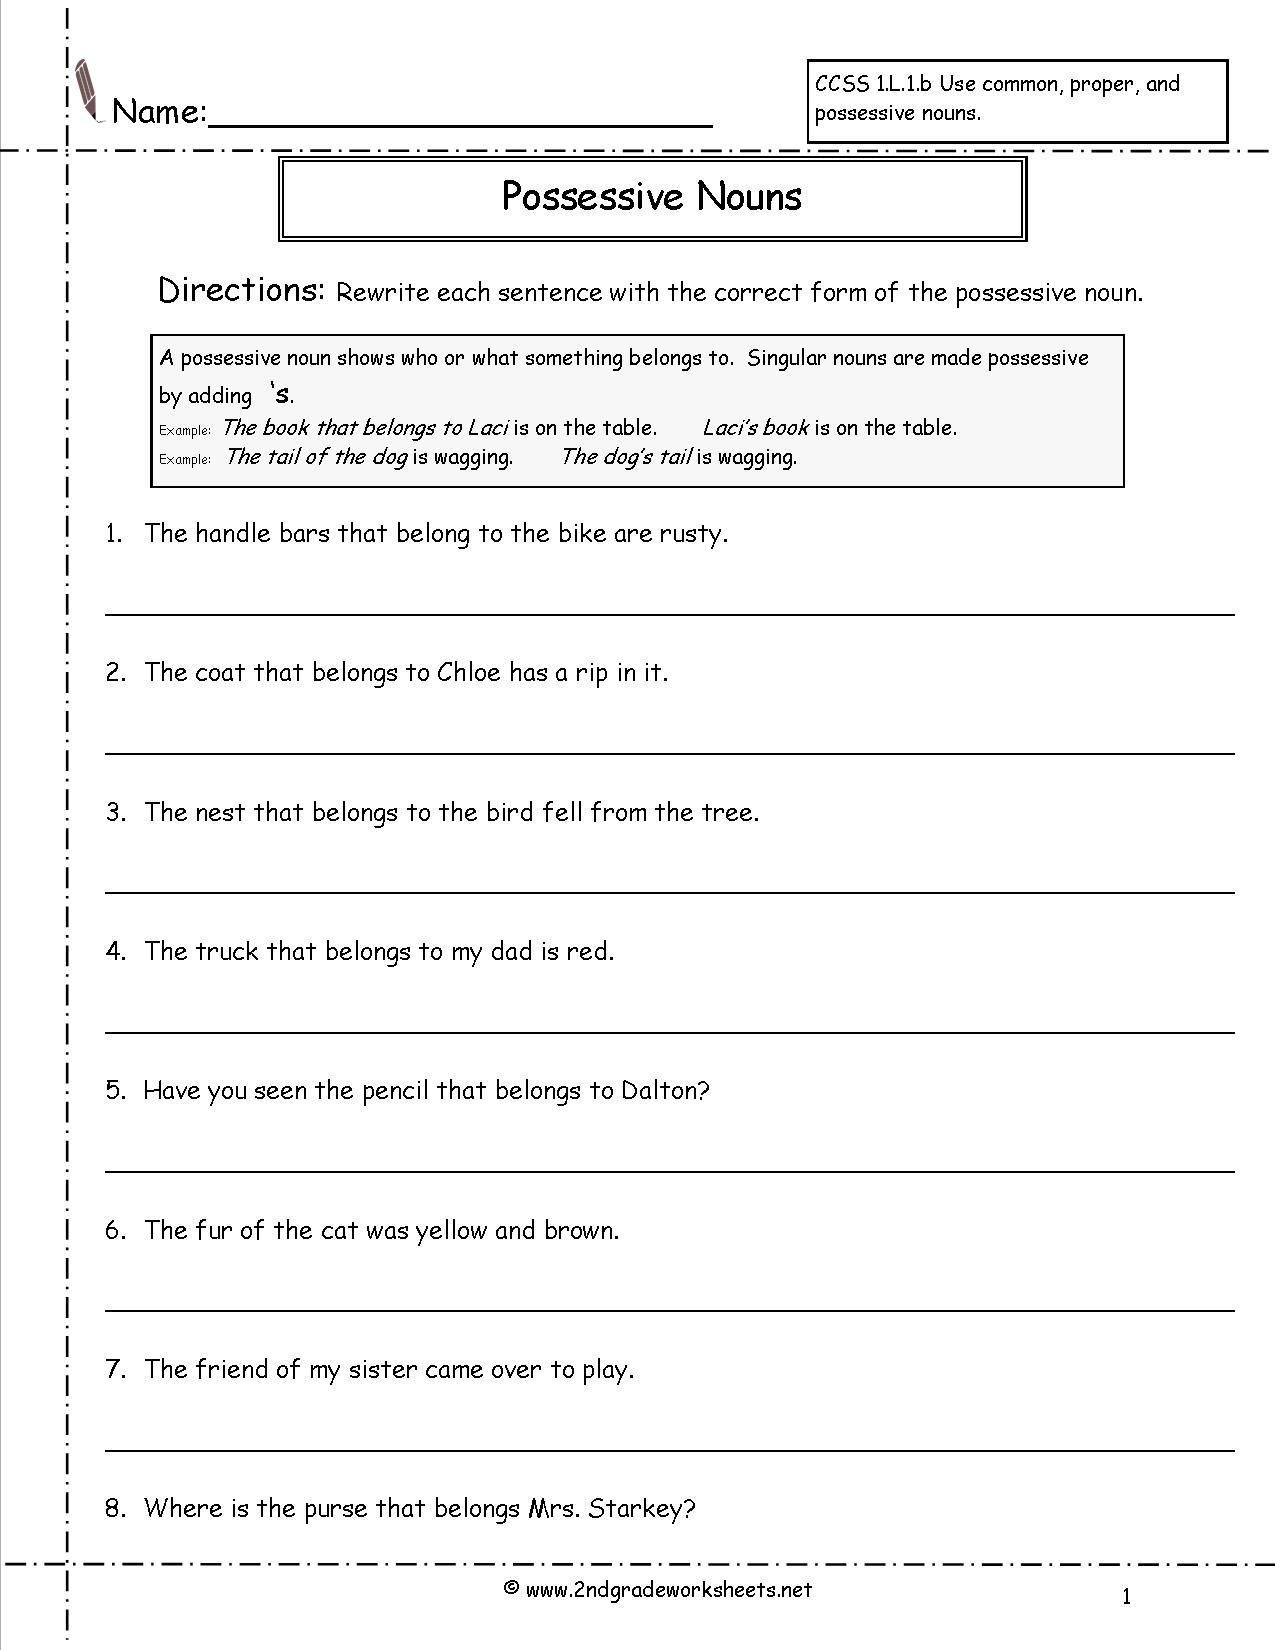 15 Best Images Of Printable Pronoun Worksheets 4th Grade Reflexive Pronouns Worksheet 4th